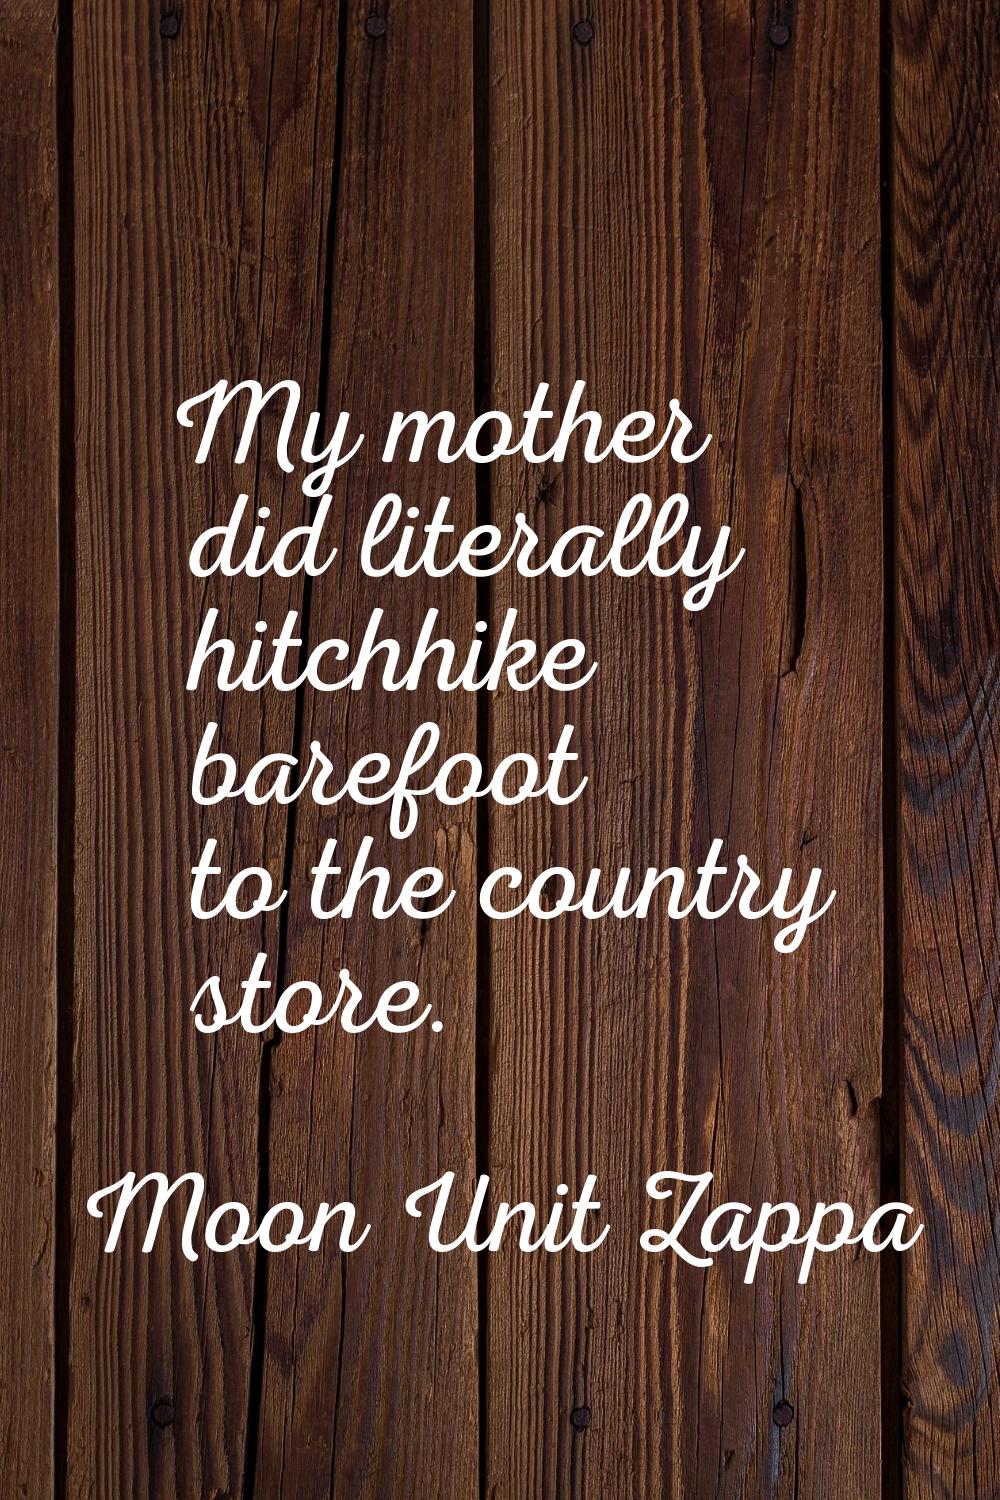 My mother did literally hitchhike barefoot to the country store.